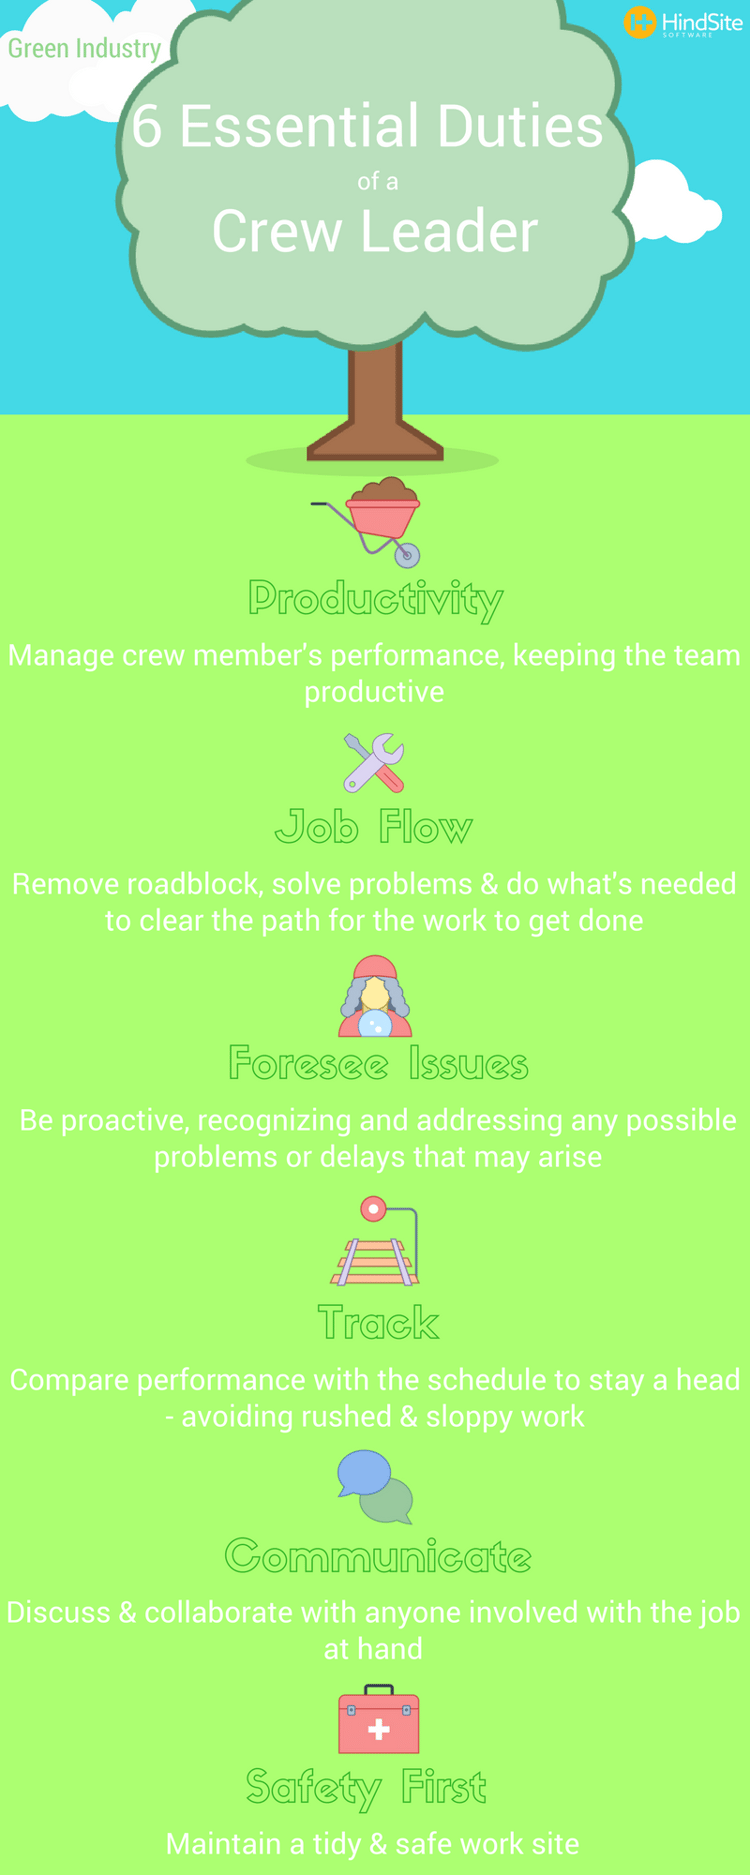 Field Service Industry- 6 Essential Duties of a Crew Leader.png